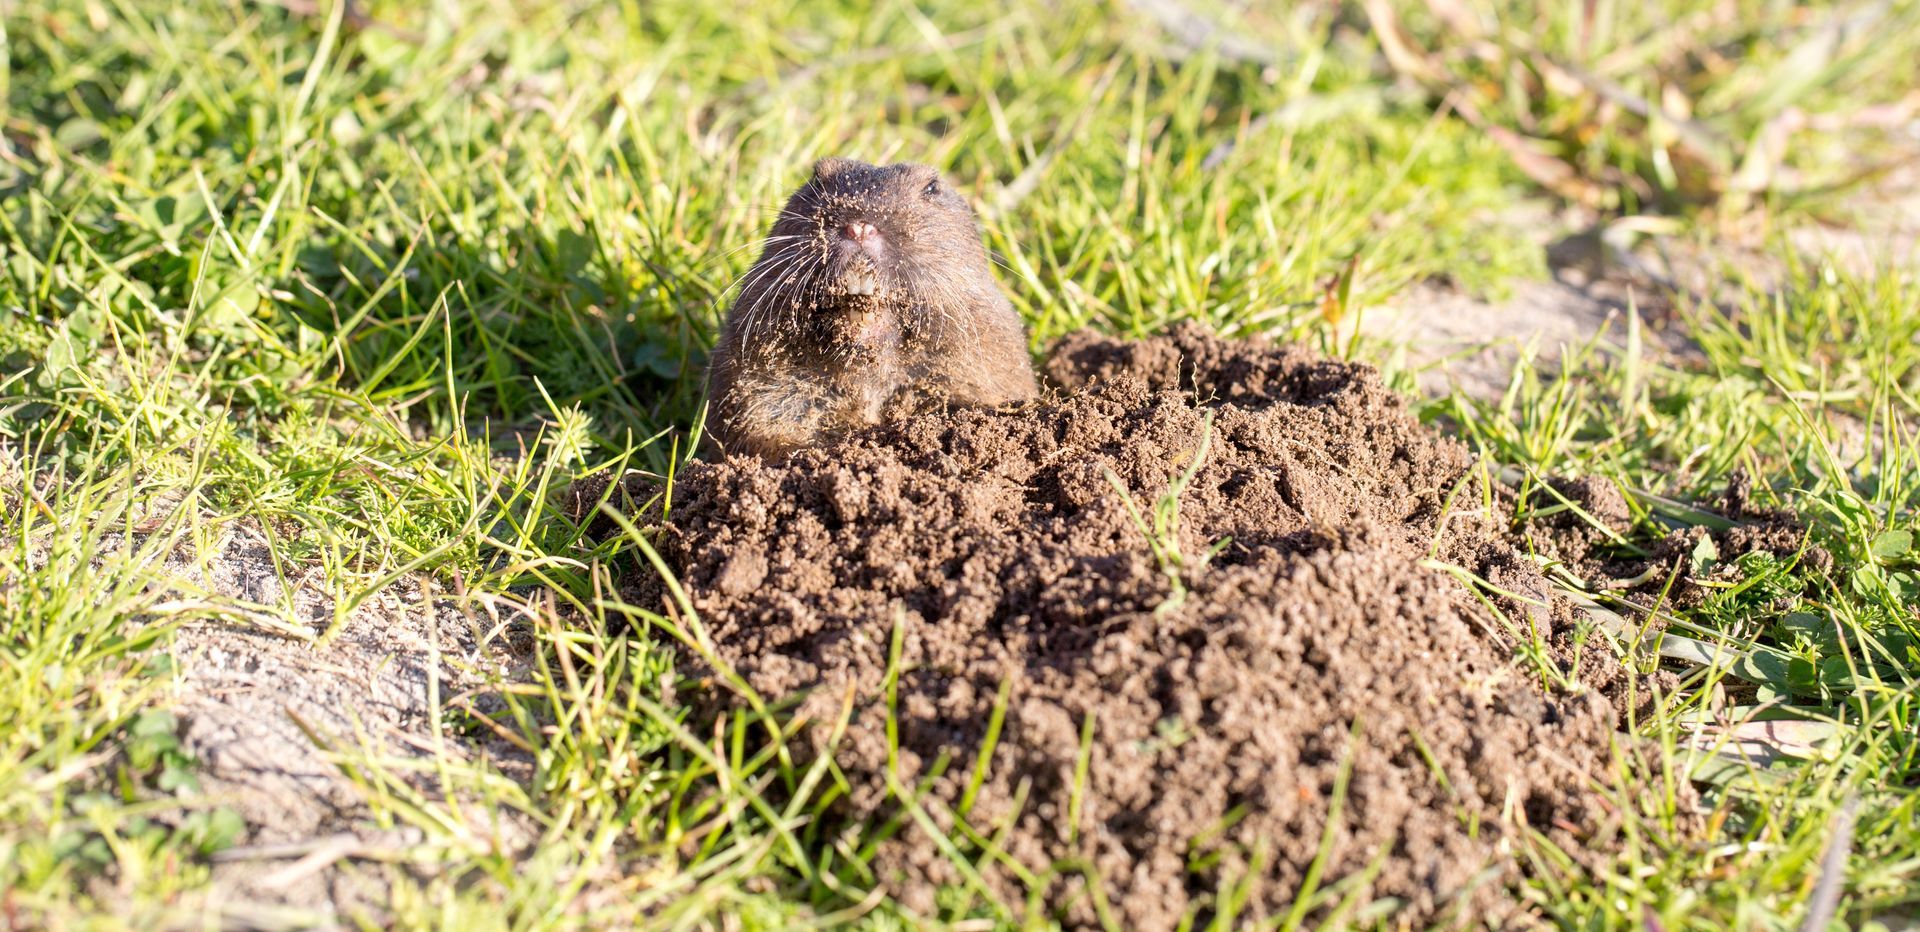 A gopher hole in the ground with excess soil around it